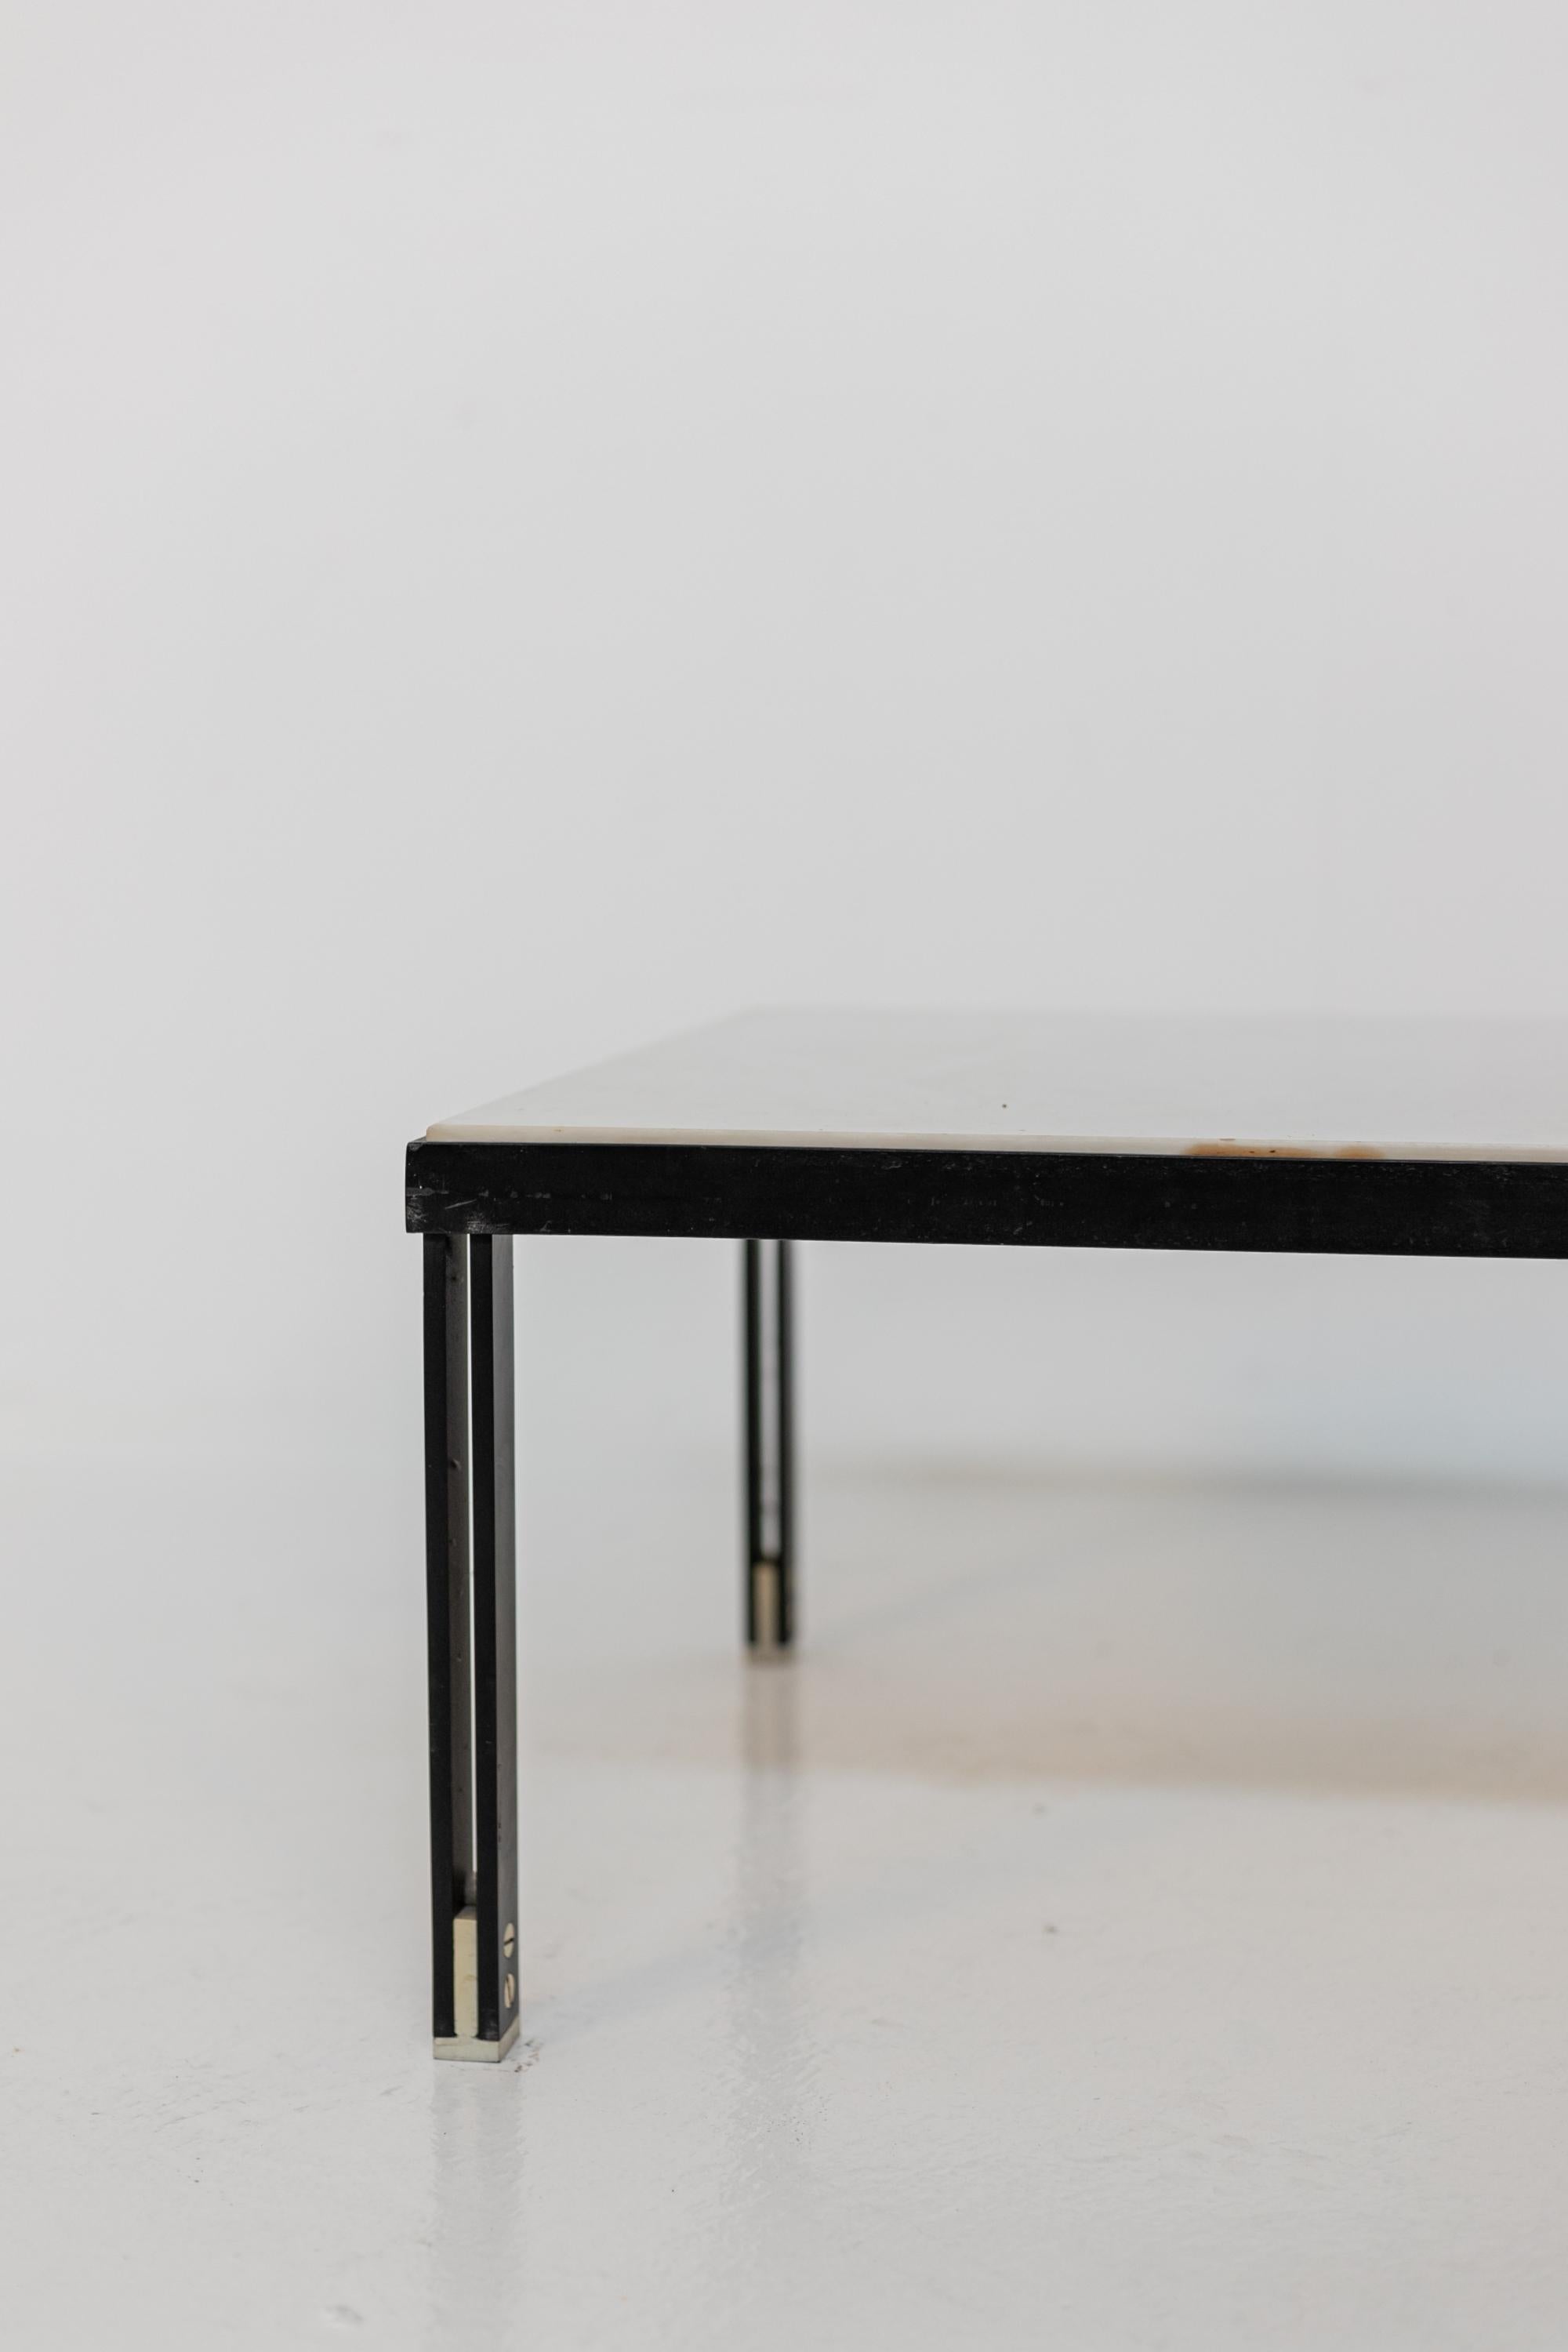 Important and large coffee table attributed to the great designer Gianfranco Frattini of the 1950s. The table comes from a private home and was created on commission. The table has a black iron frame with clean and simple lines. At the feet of the